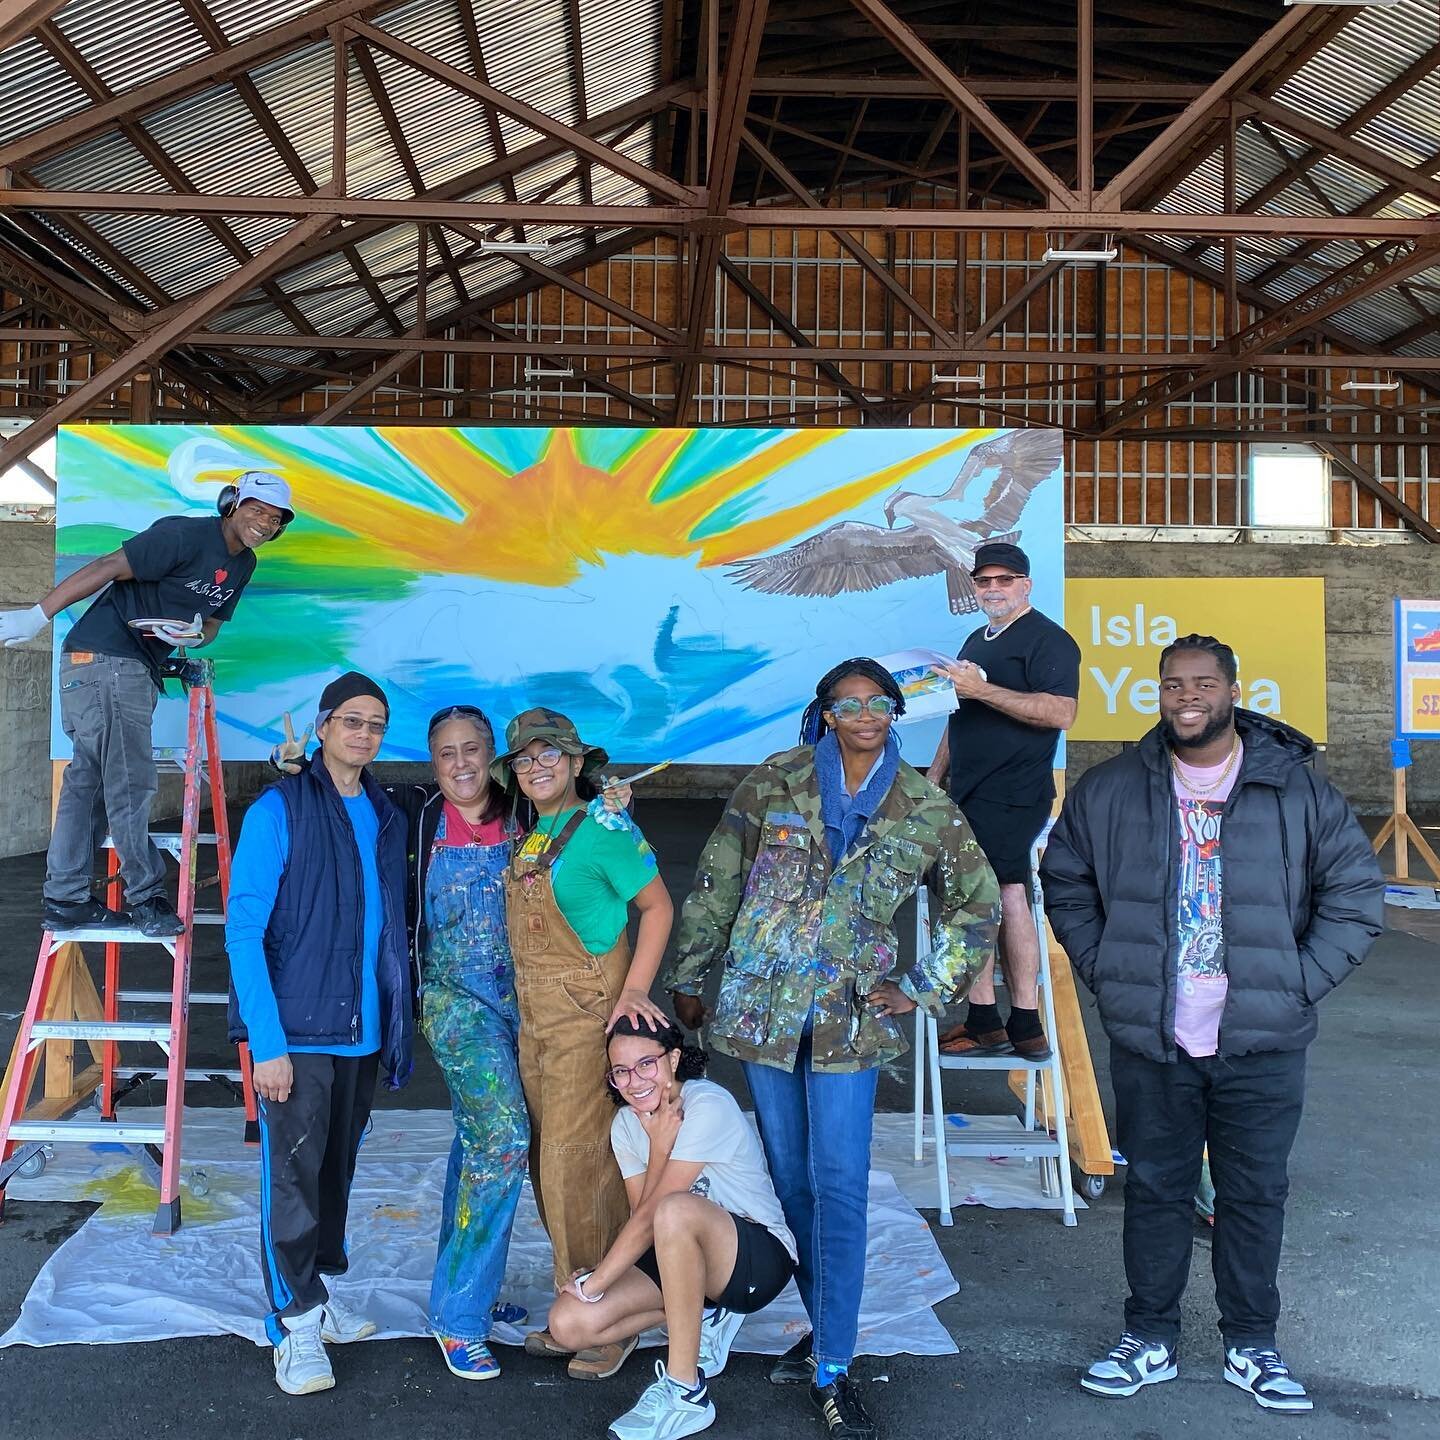 Melissa Penny &amp; Channa Booker completed their Mare Island Art Billboards and they have contributed to a total of five roadside art billboards that will be installed on the north part of Mare Island
.
The other art billboards are by: Eugenia Ho, K